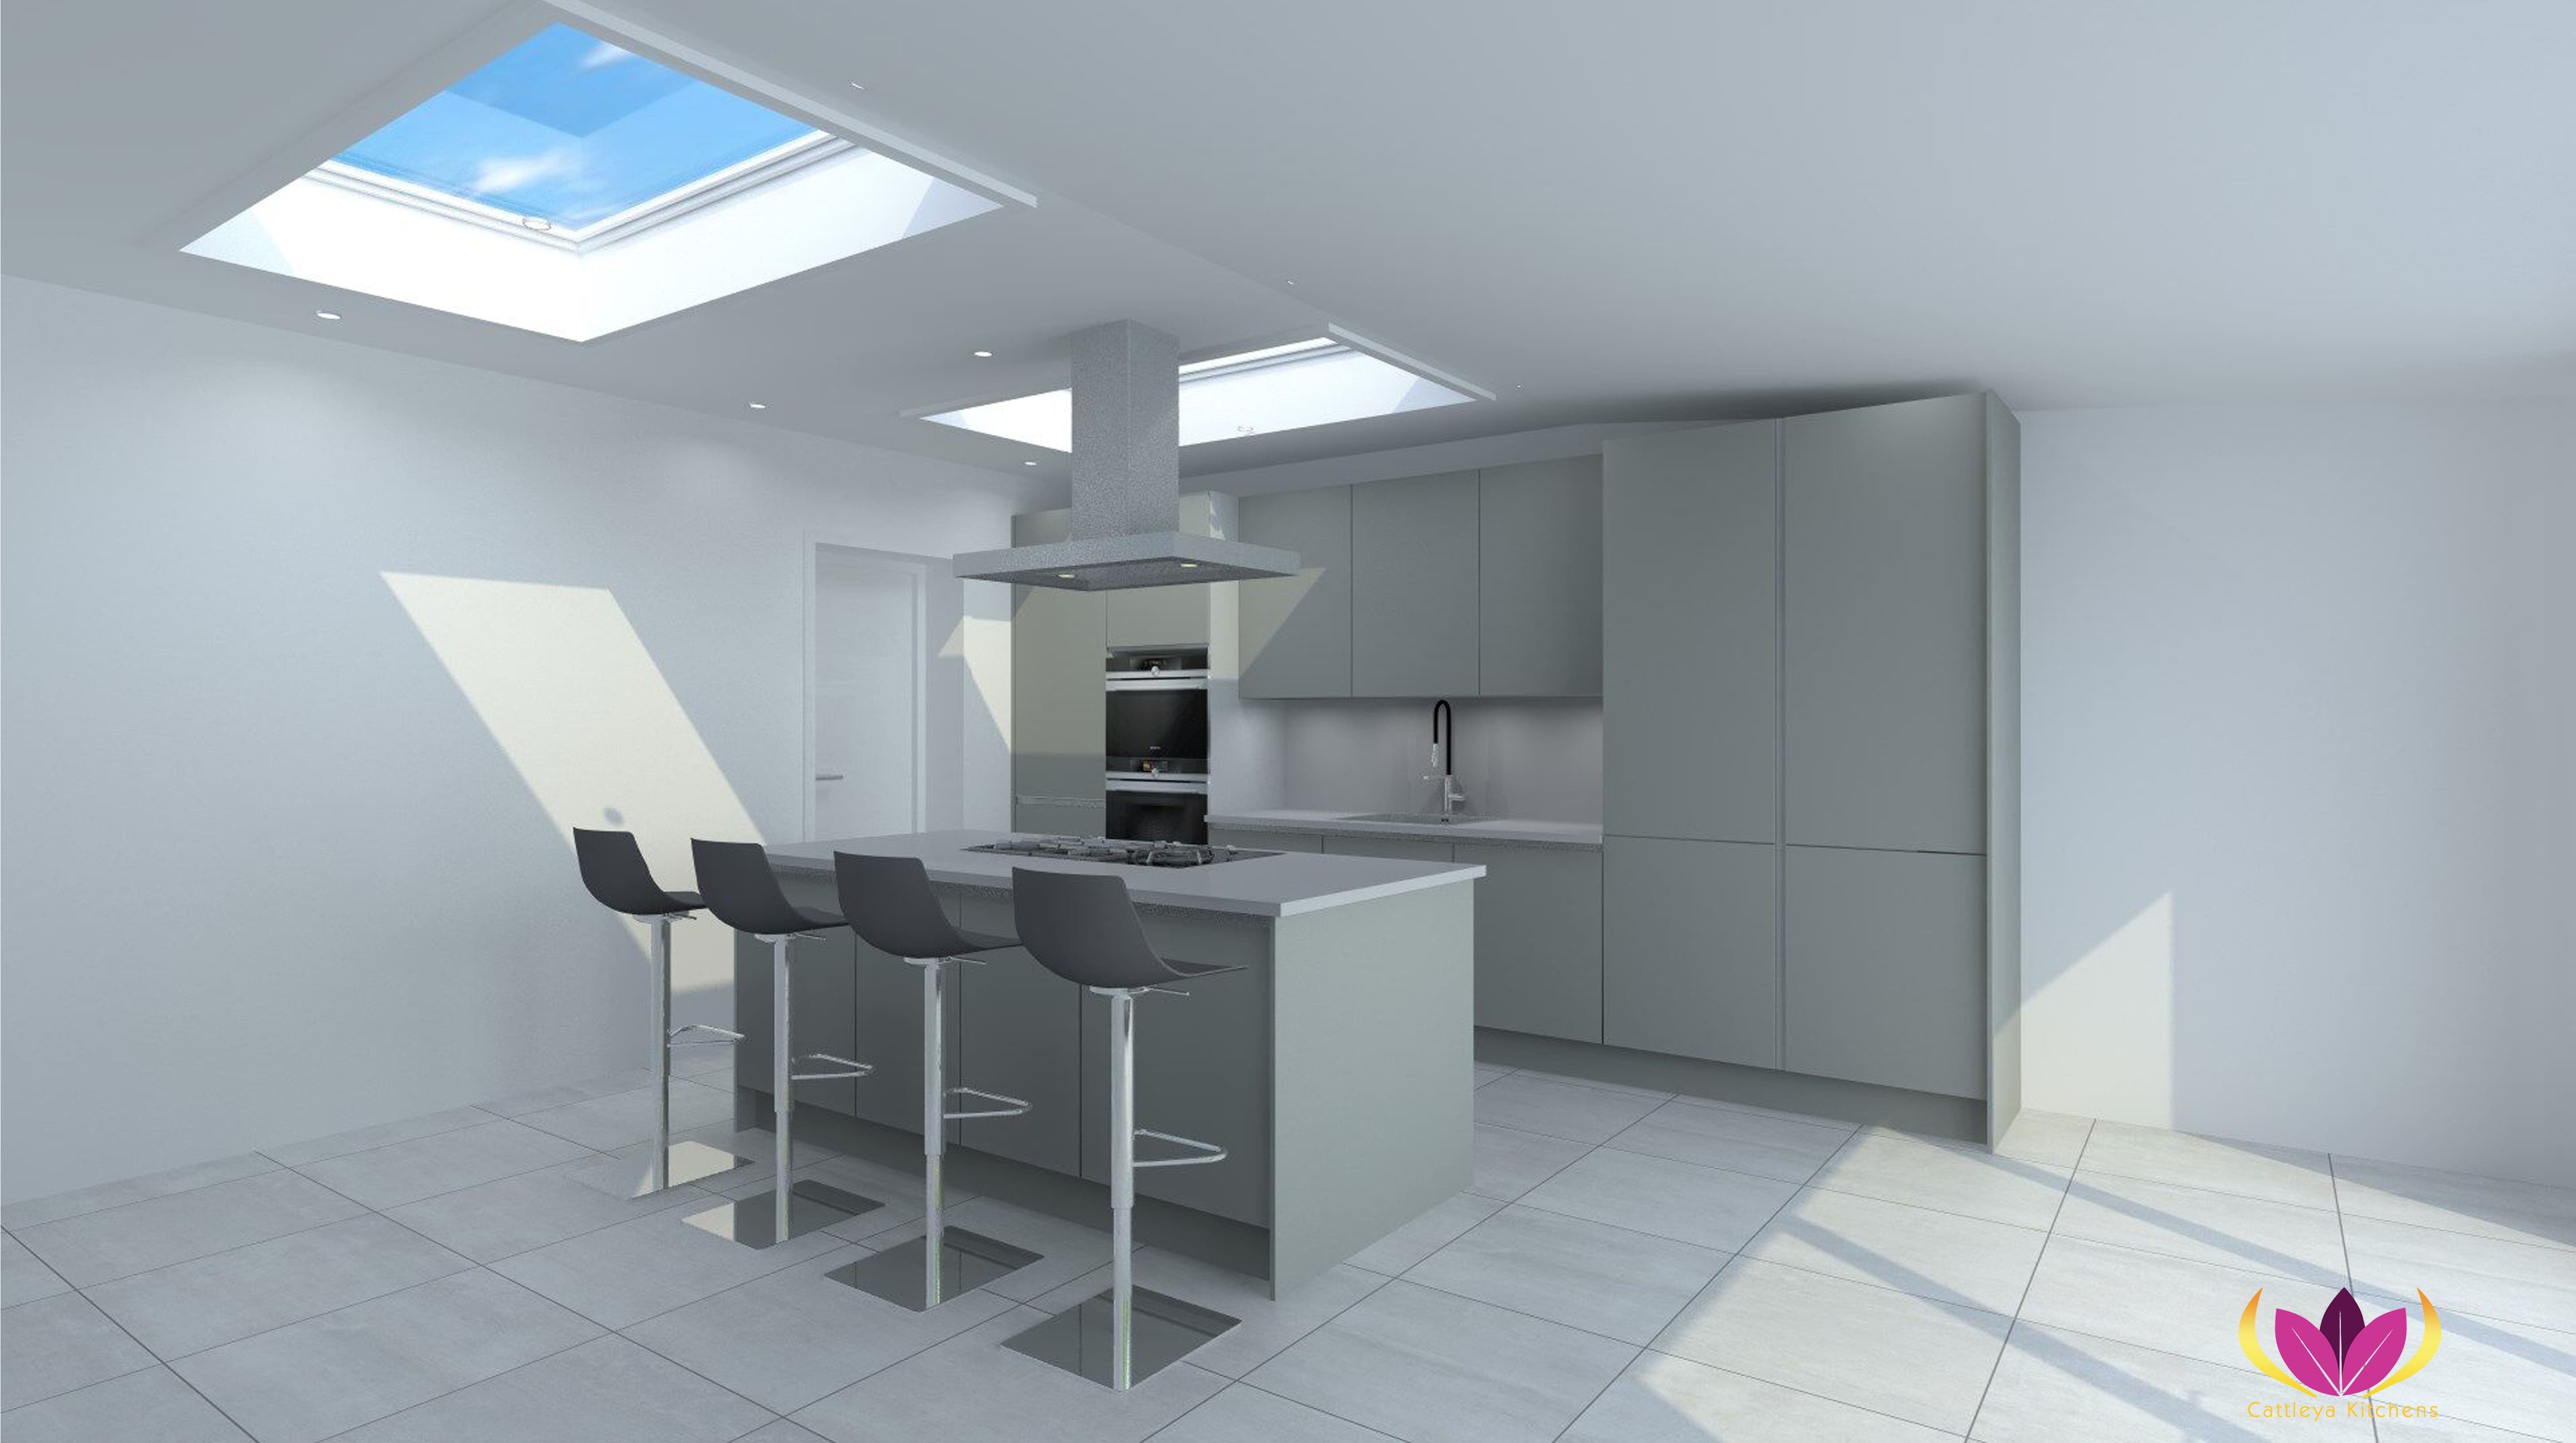 Edgware Finished Project Kitchen Plan